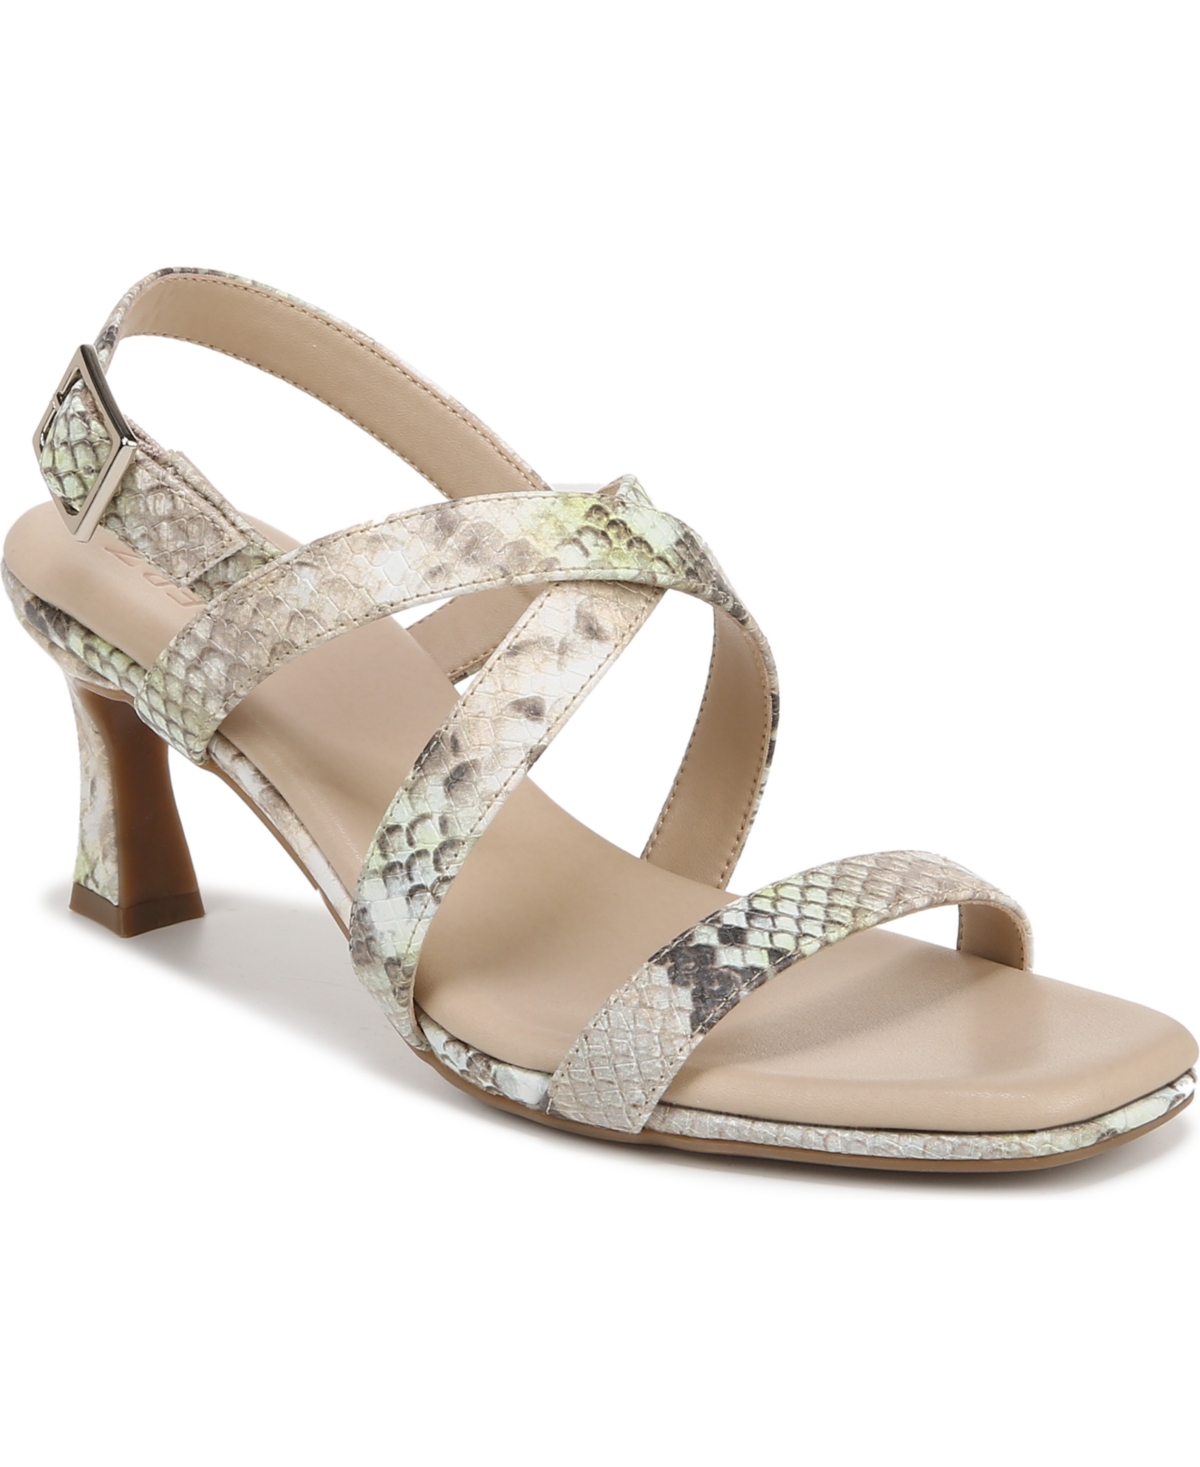 Naturalizer Kiki Dress Sandals In Lime Snake Print Faux Leather